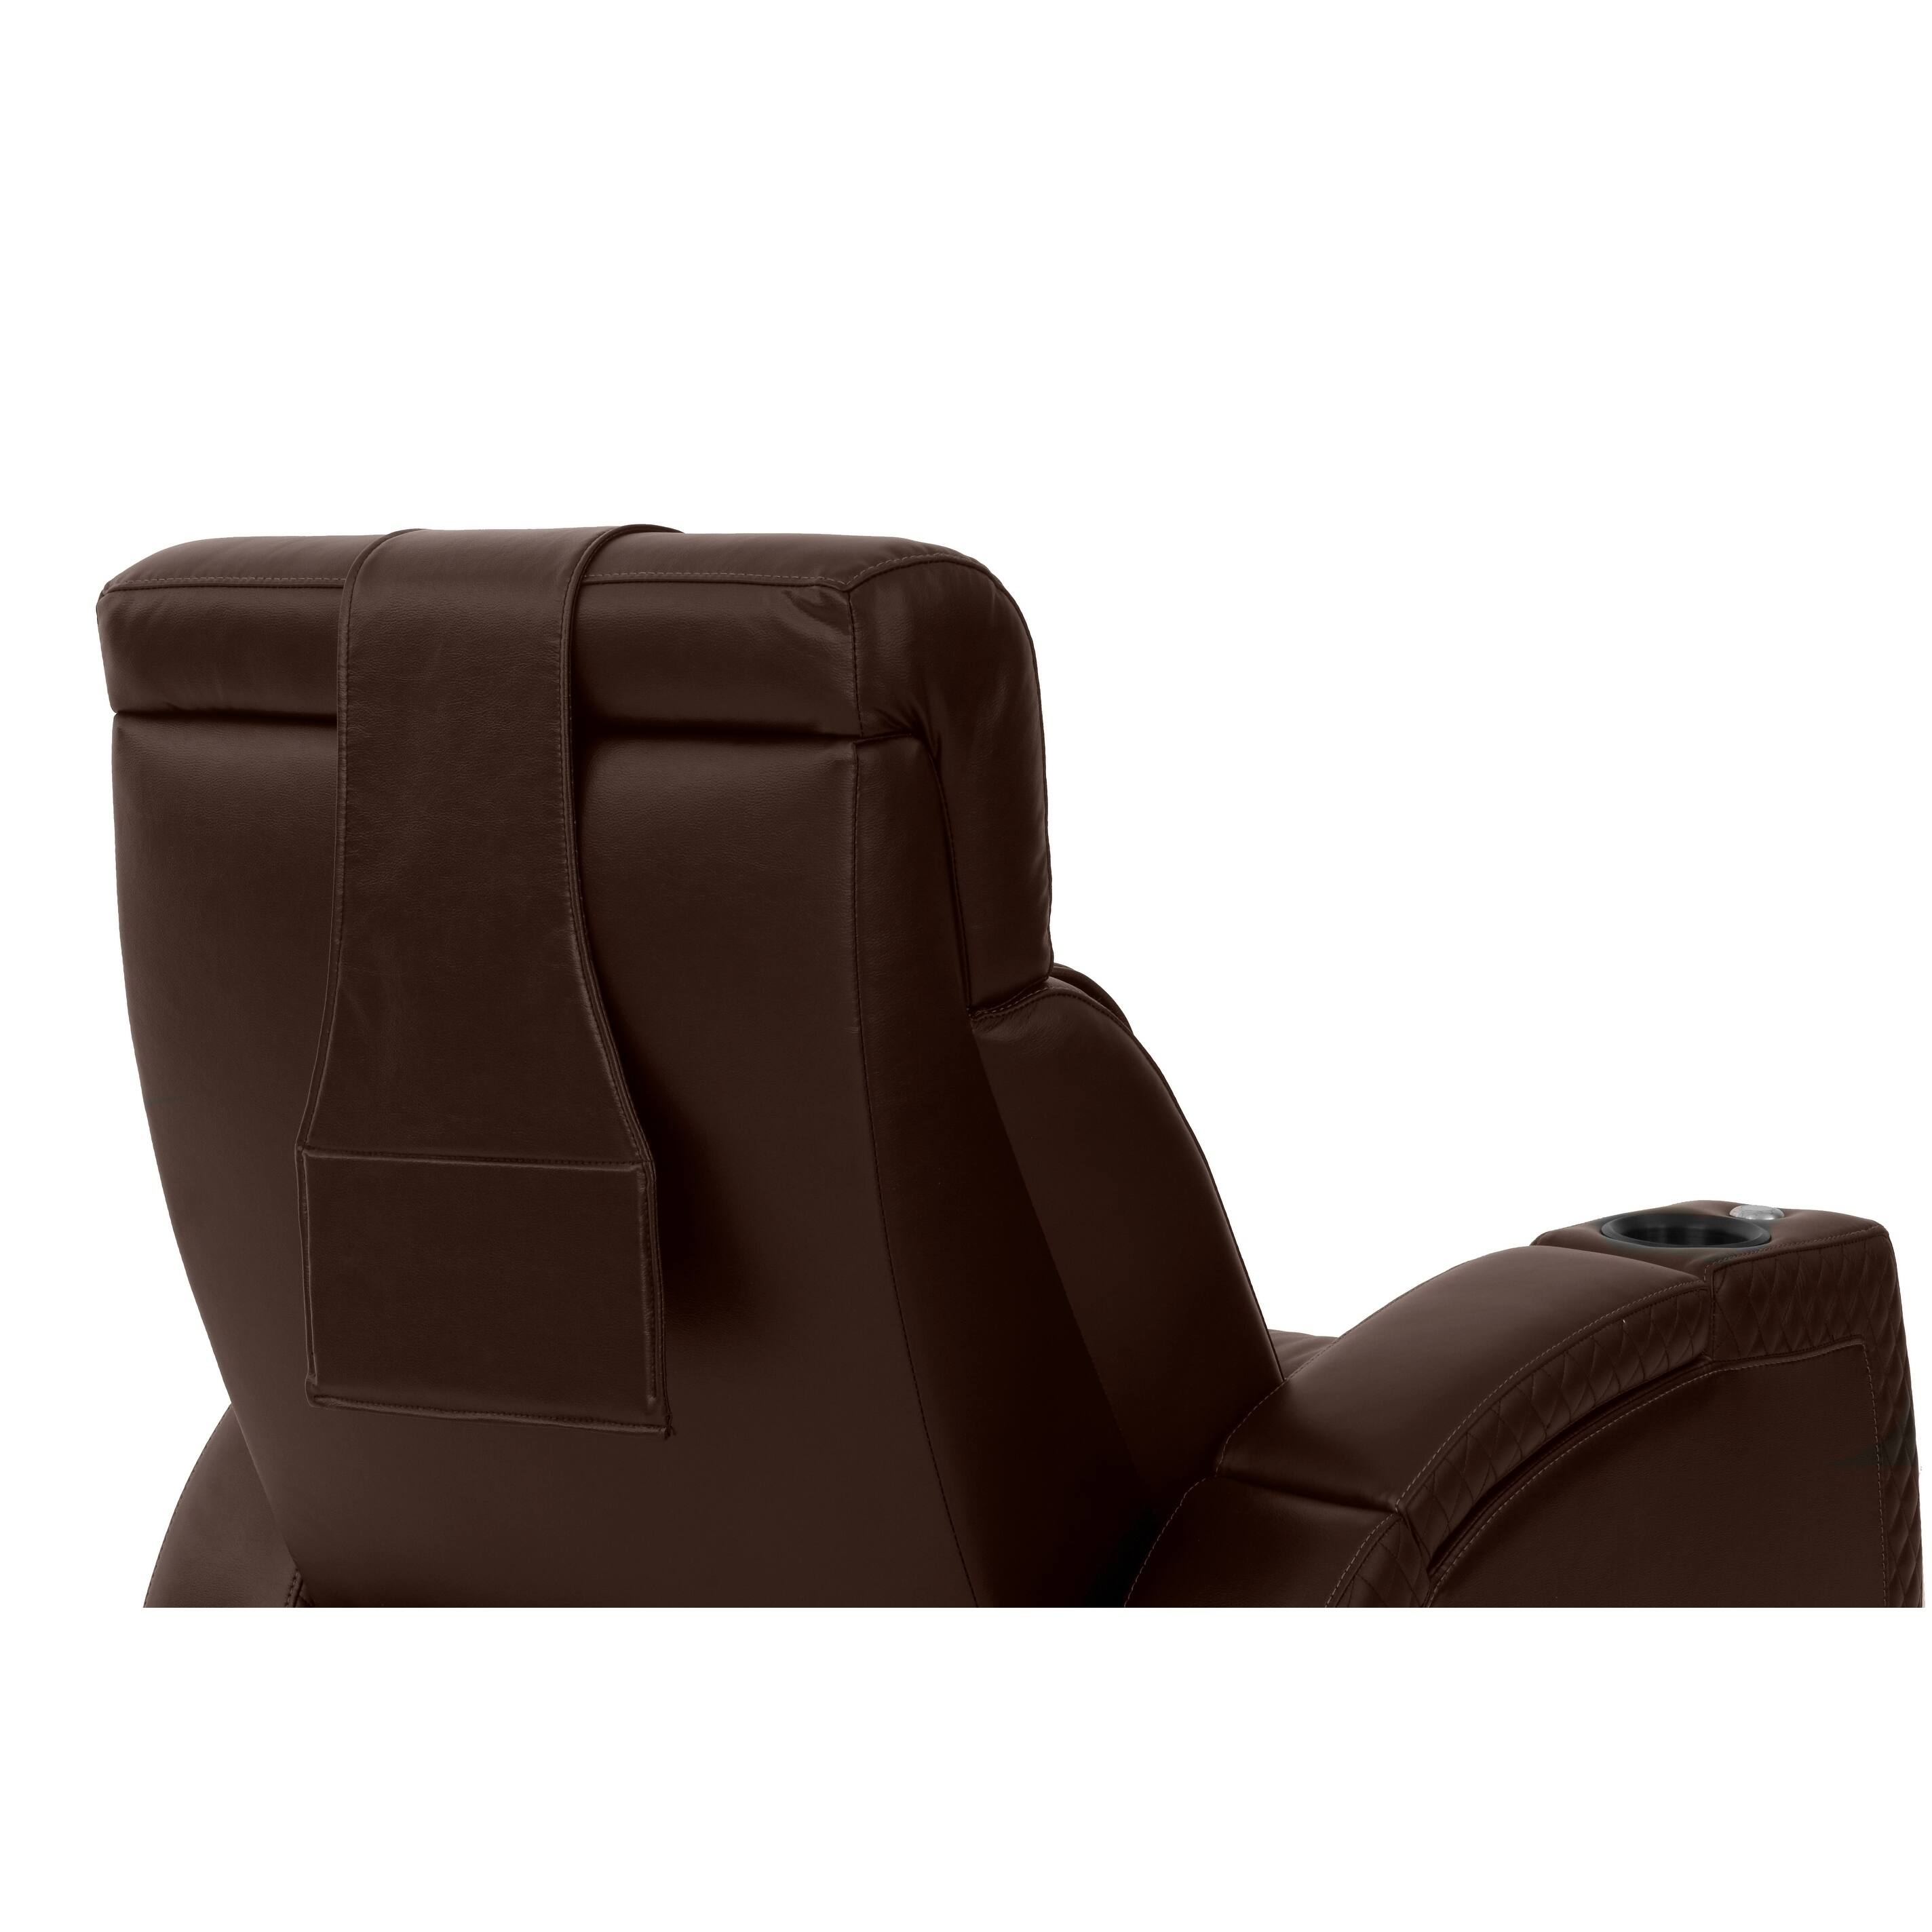 Buy Recliner Chairs & Rocking Recliners Online at Overstock | Our Best